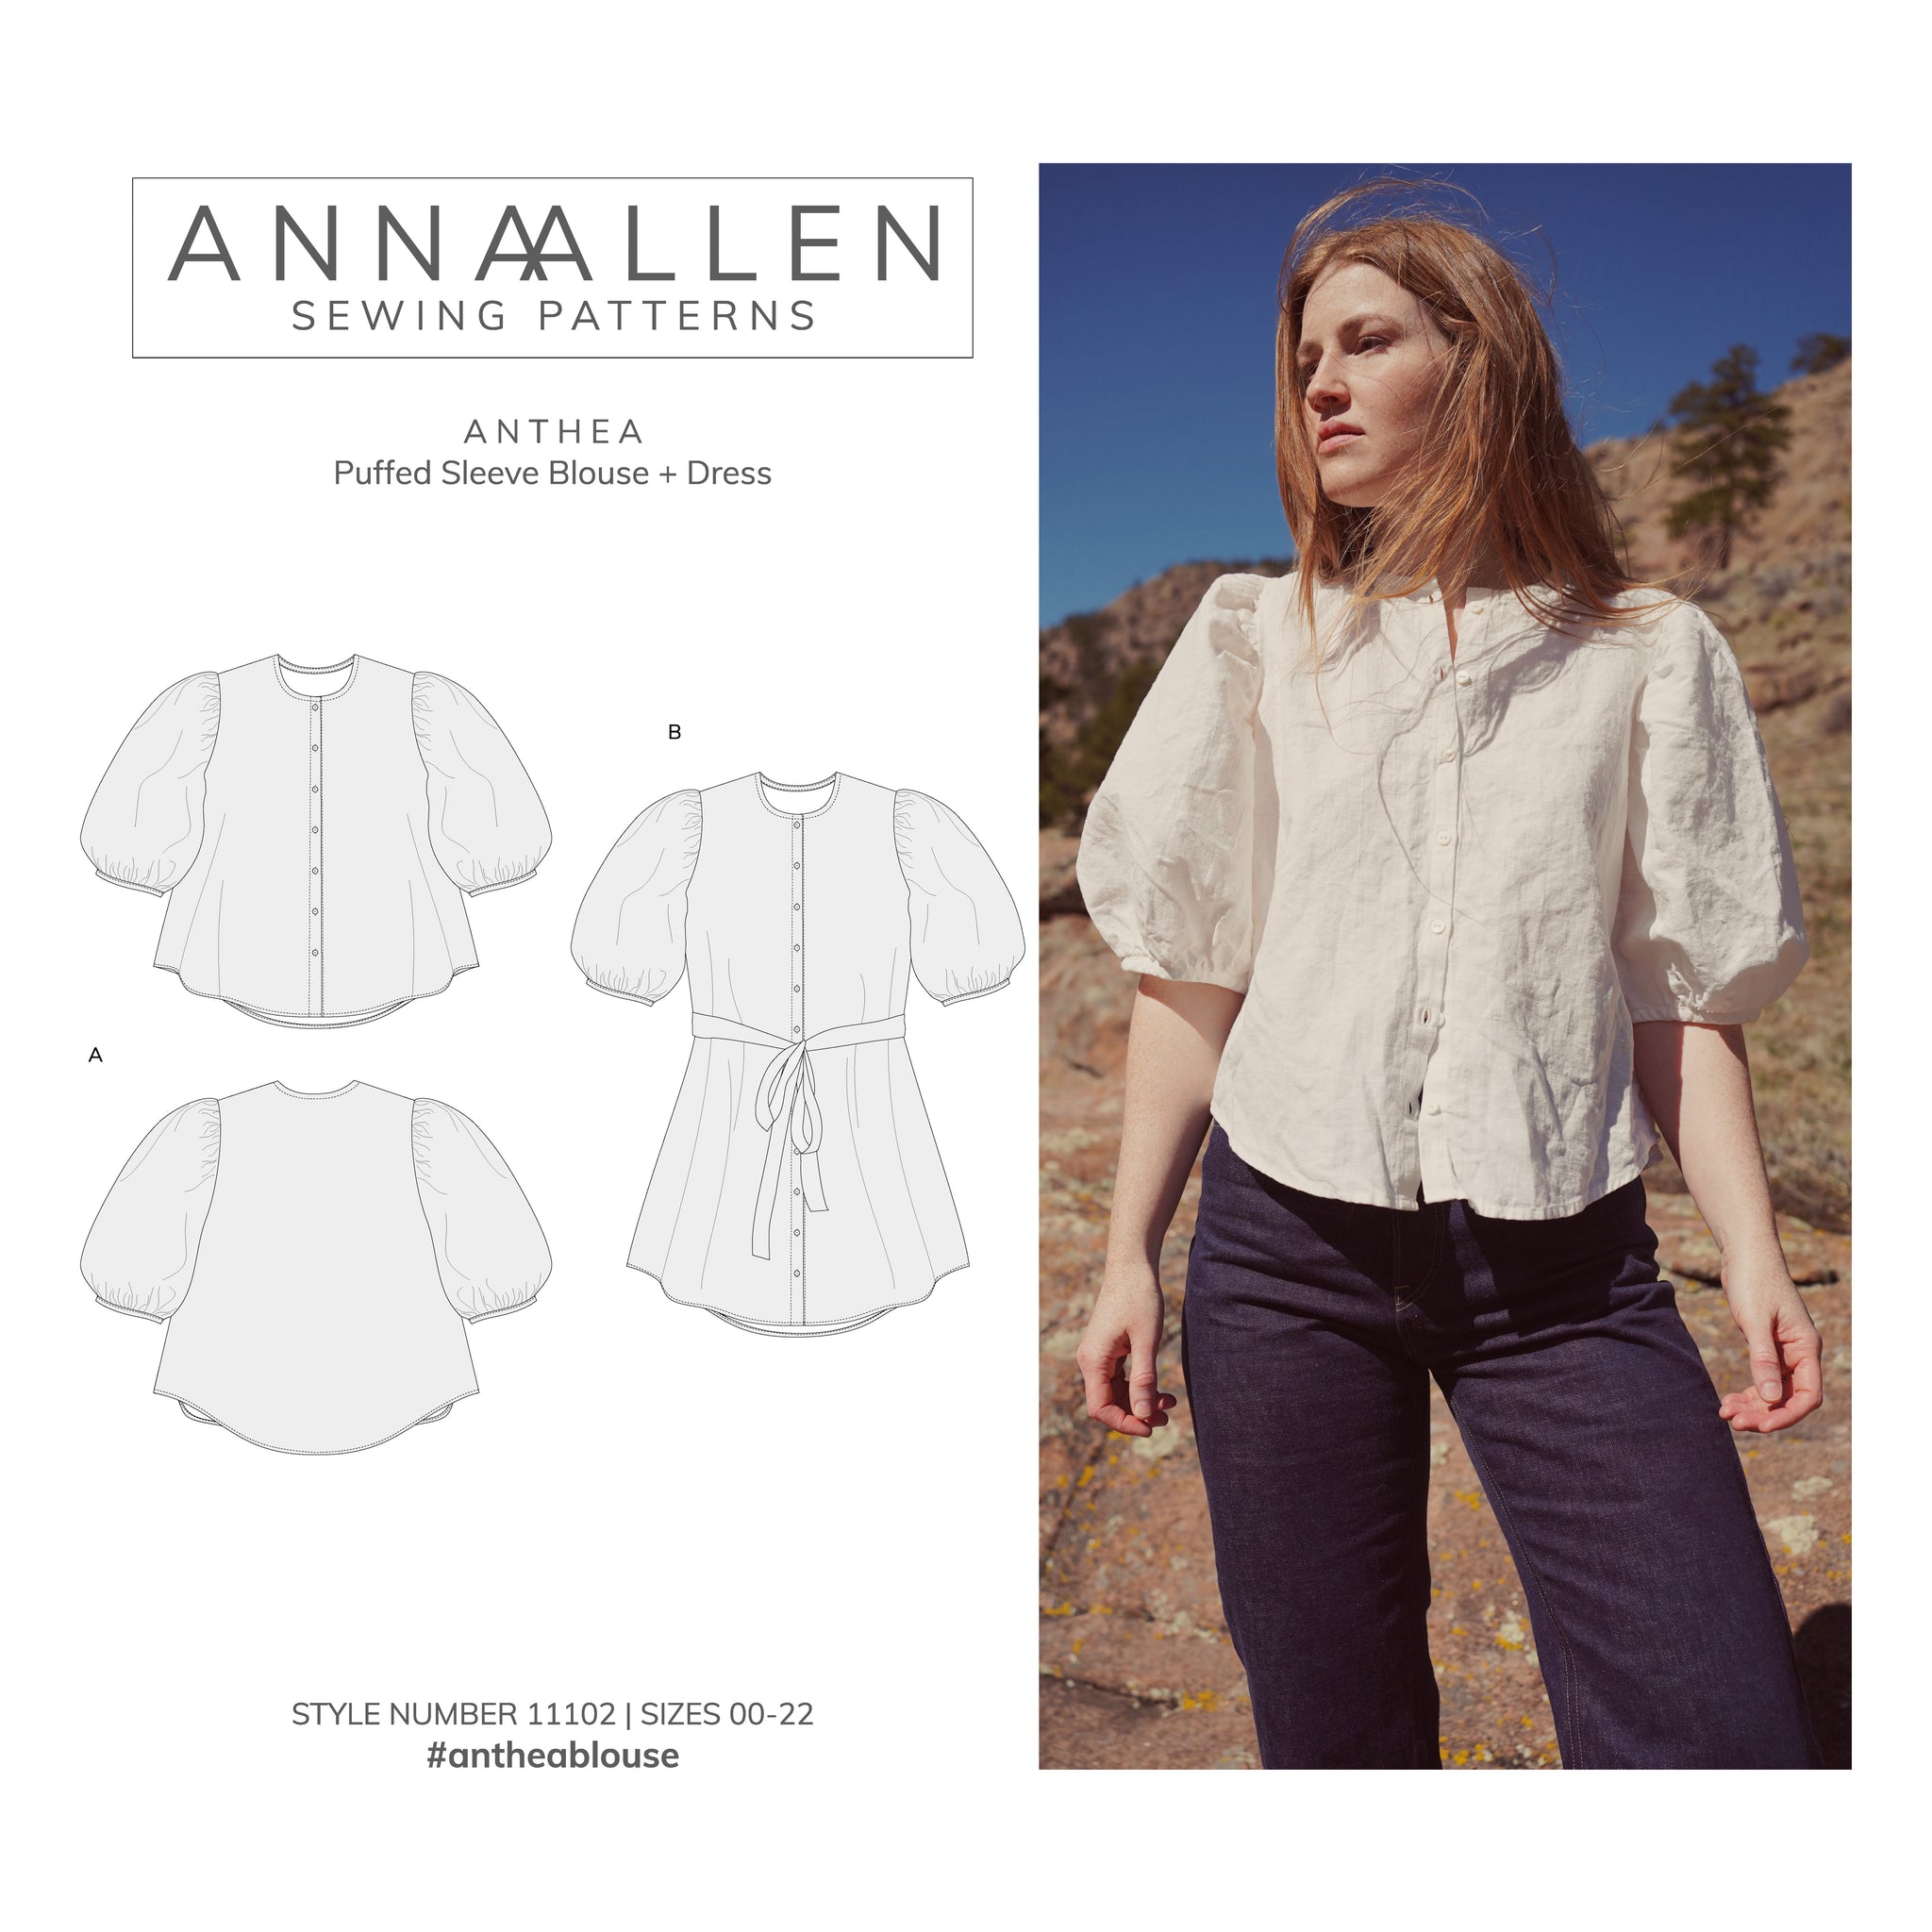 stole chance Ubrugelig Anthea Blouse + Dress - PDF Sewing Pattern Sizes 00-22 – Anna Allen Clothing